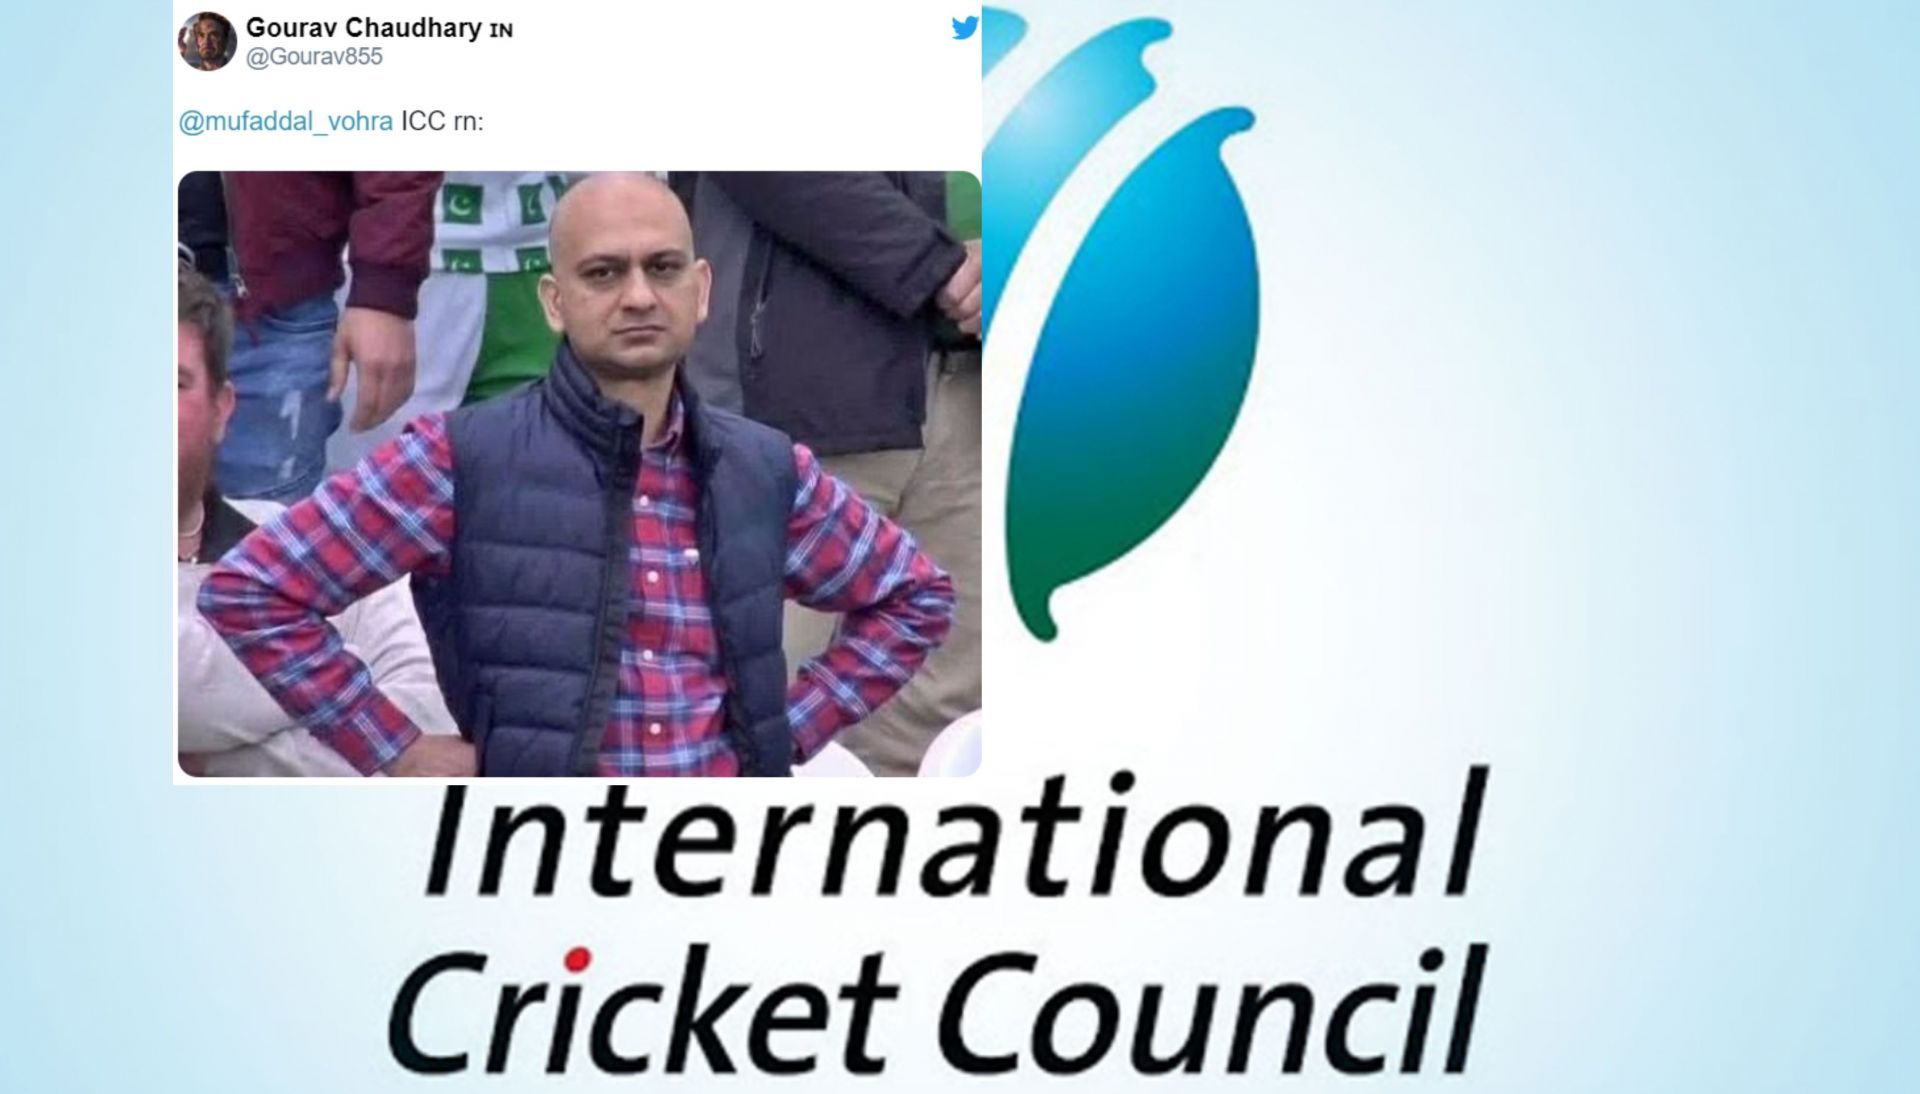 Fans react after learning about ICC losing money to online fraudsters